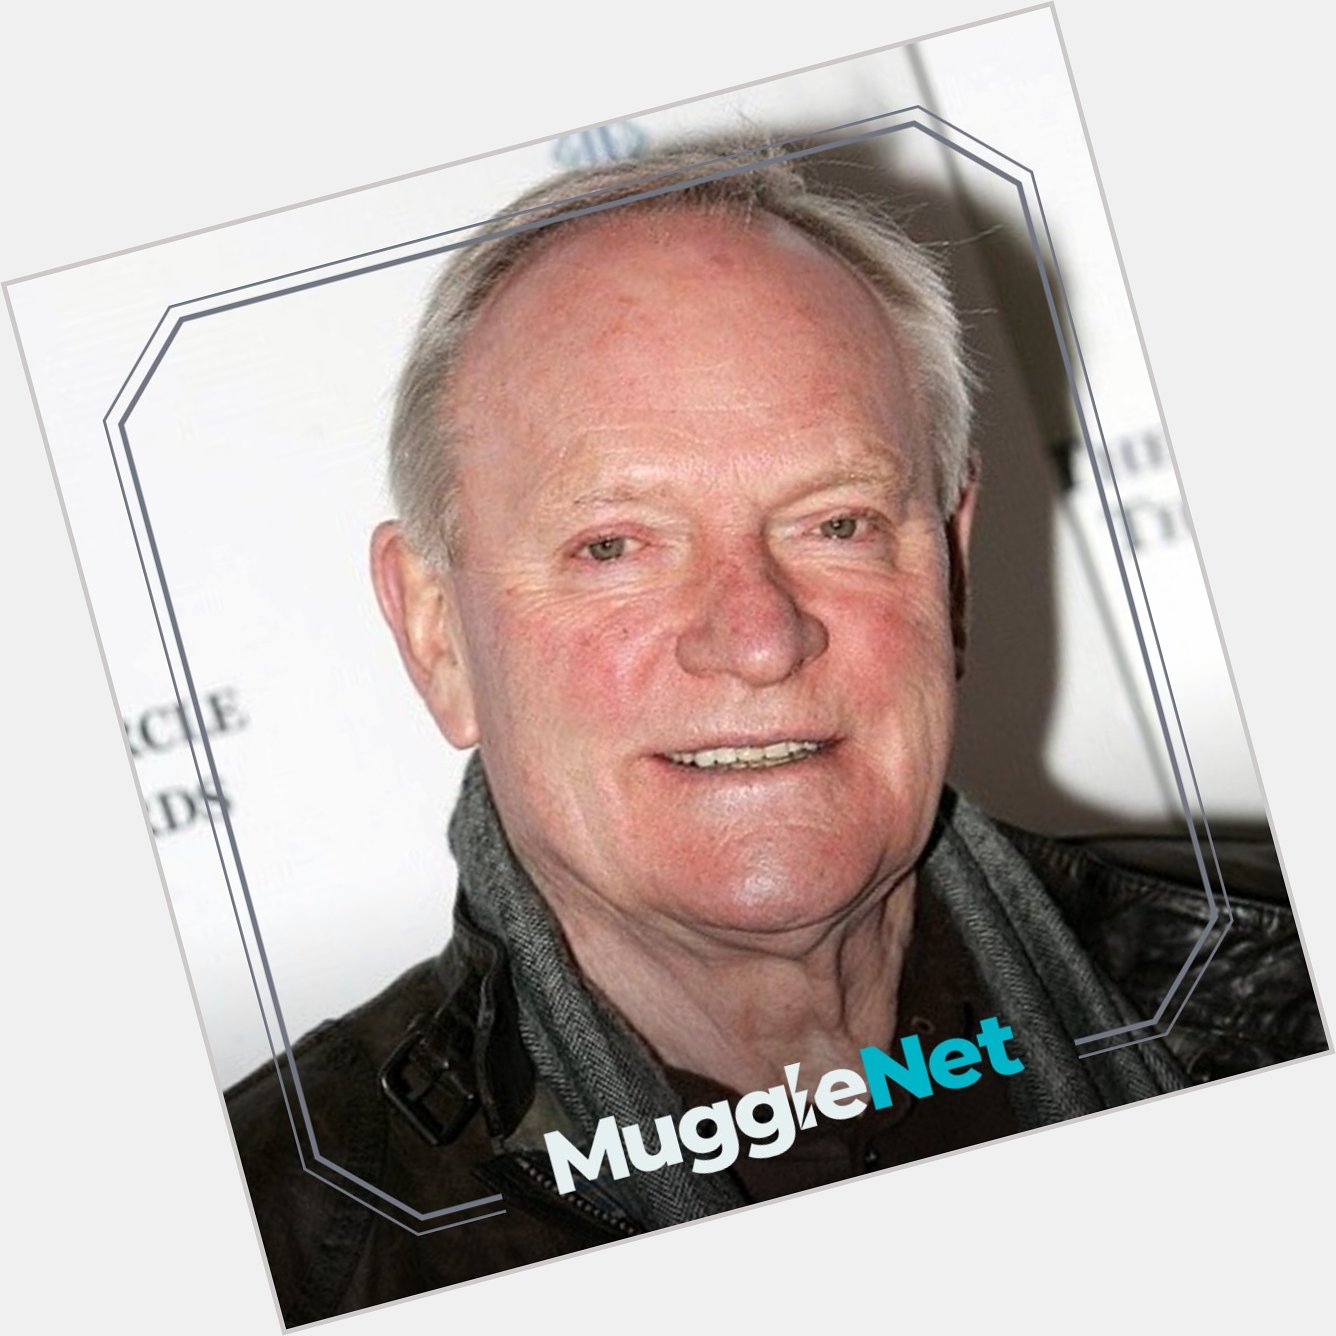 Happy birthday to Julian Glover, who was the voice of Aragog in the films! 